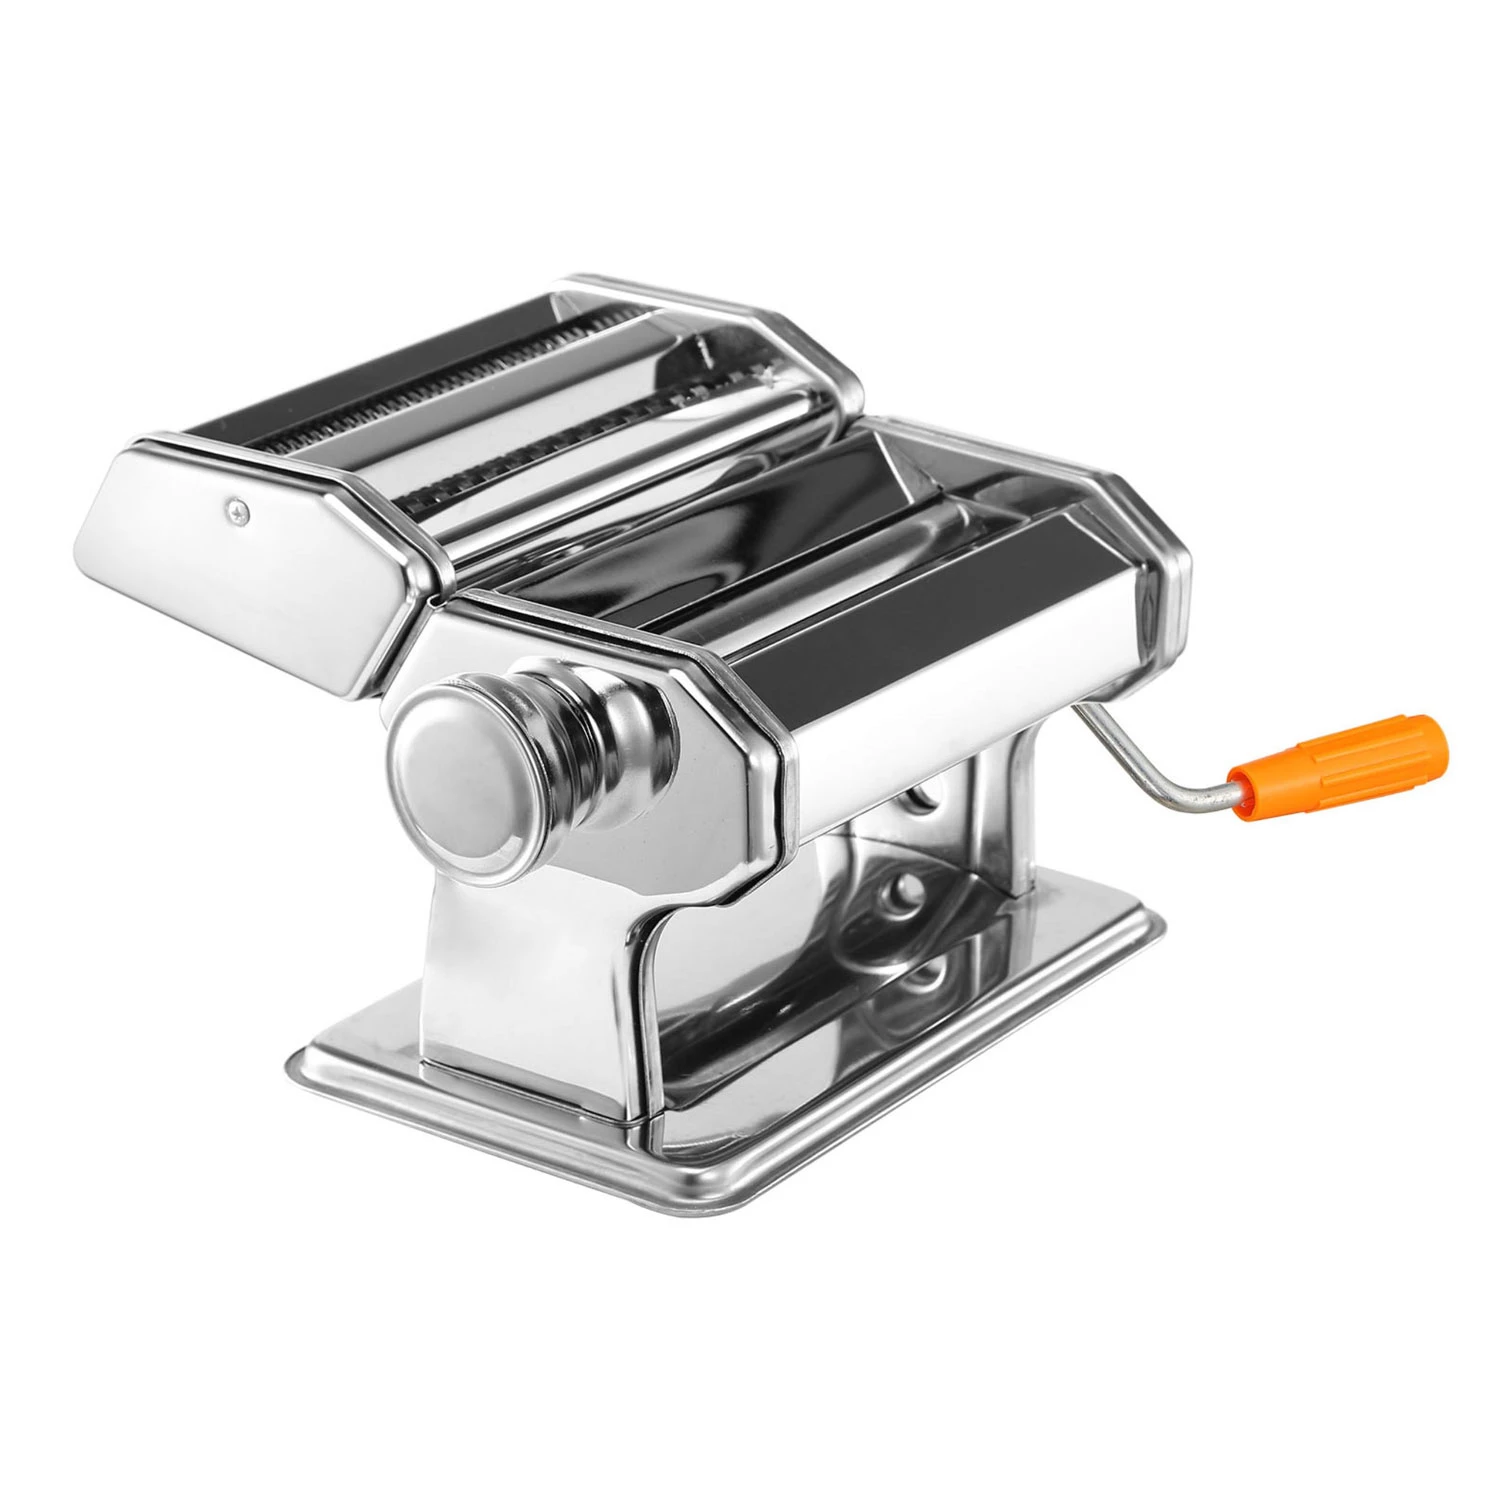 Stainless Steel Pasta Maker Roller - 6 Thickness Settings, Fettuccine Noodle - 1 Machine